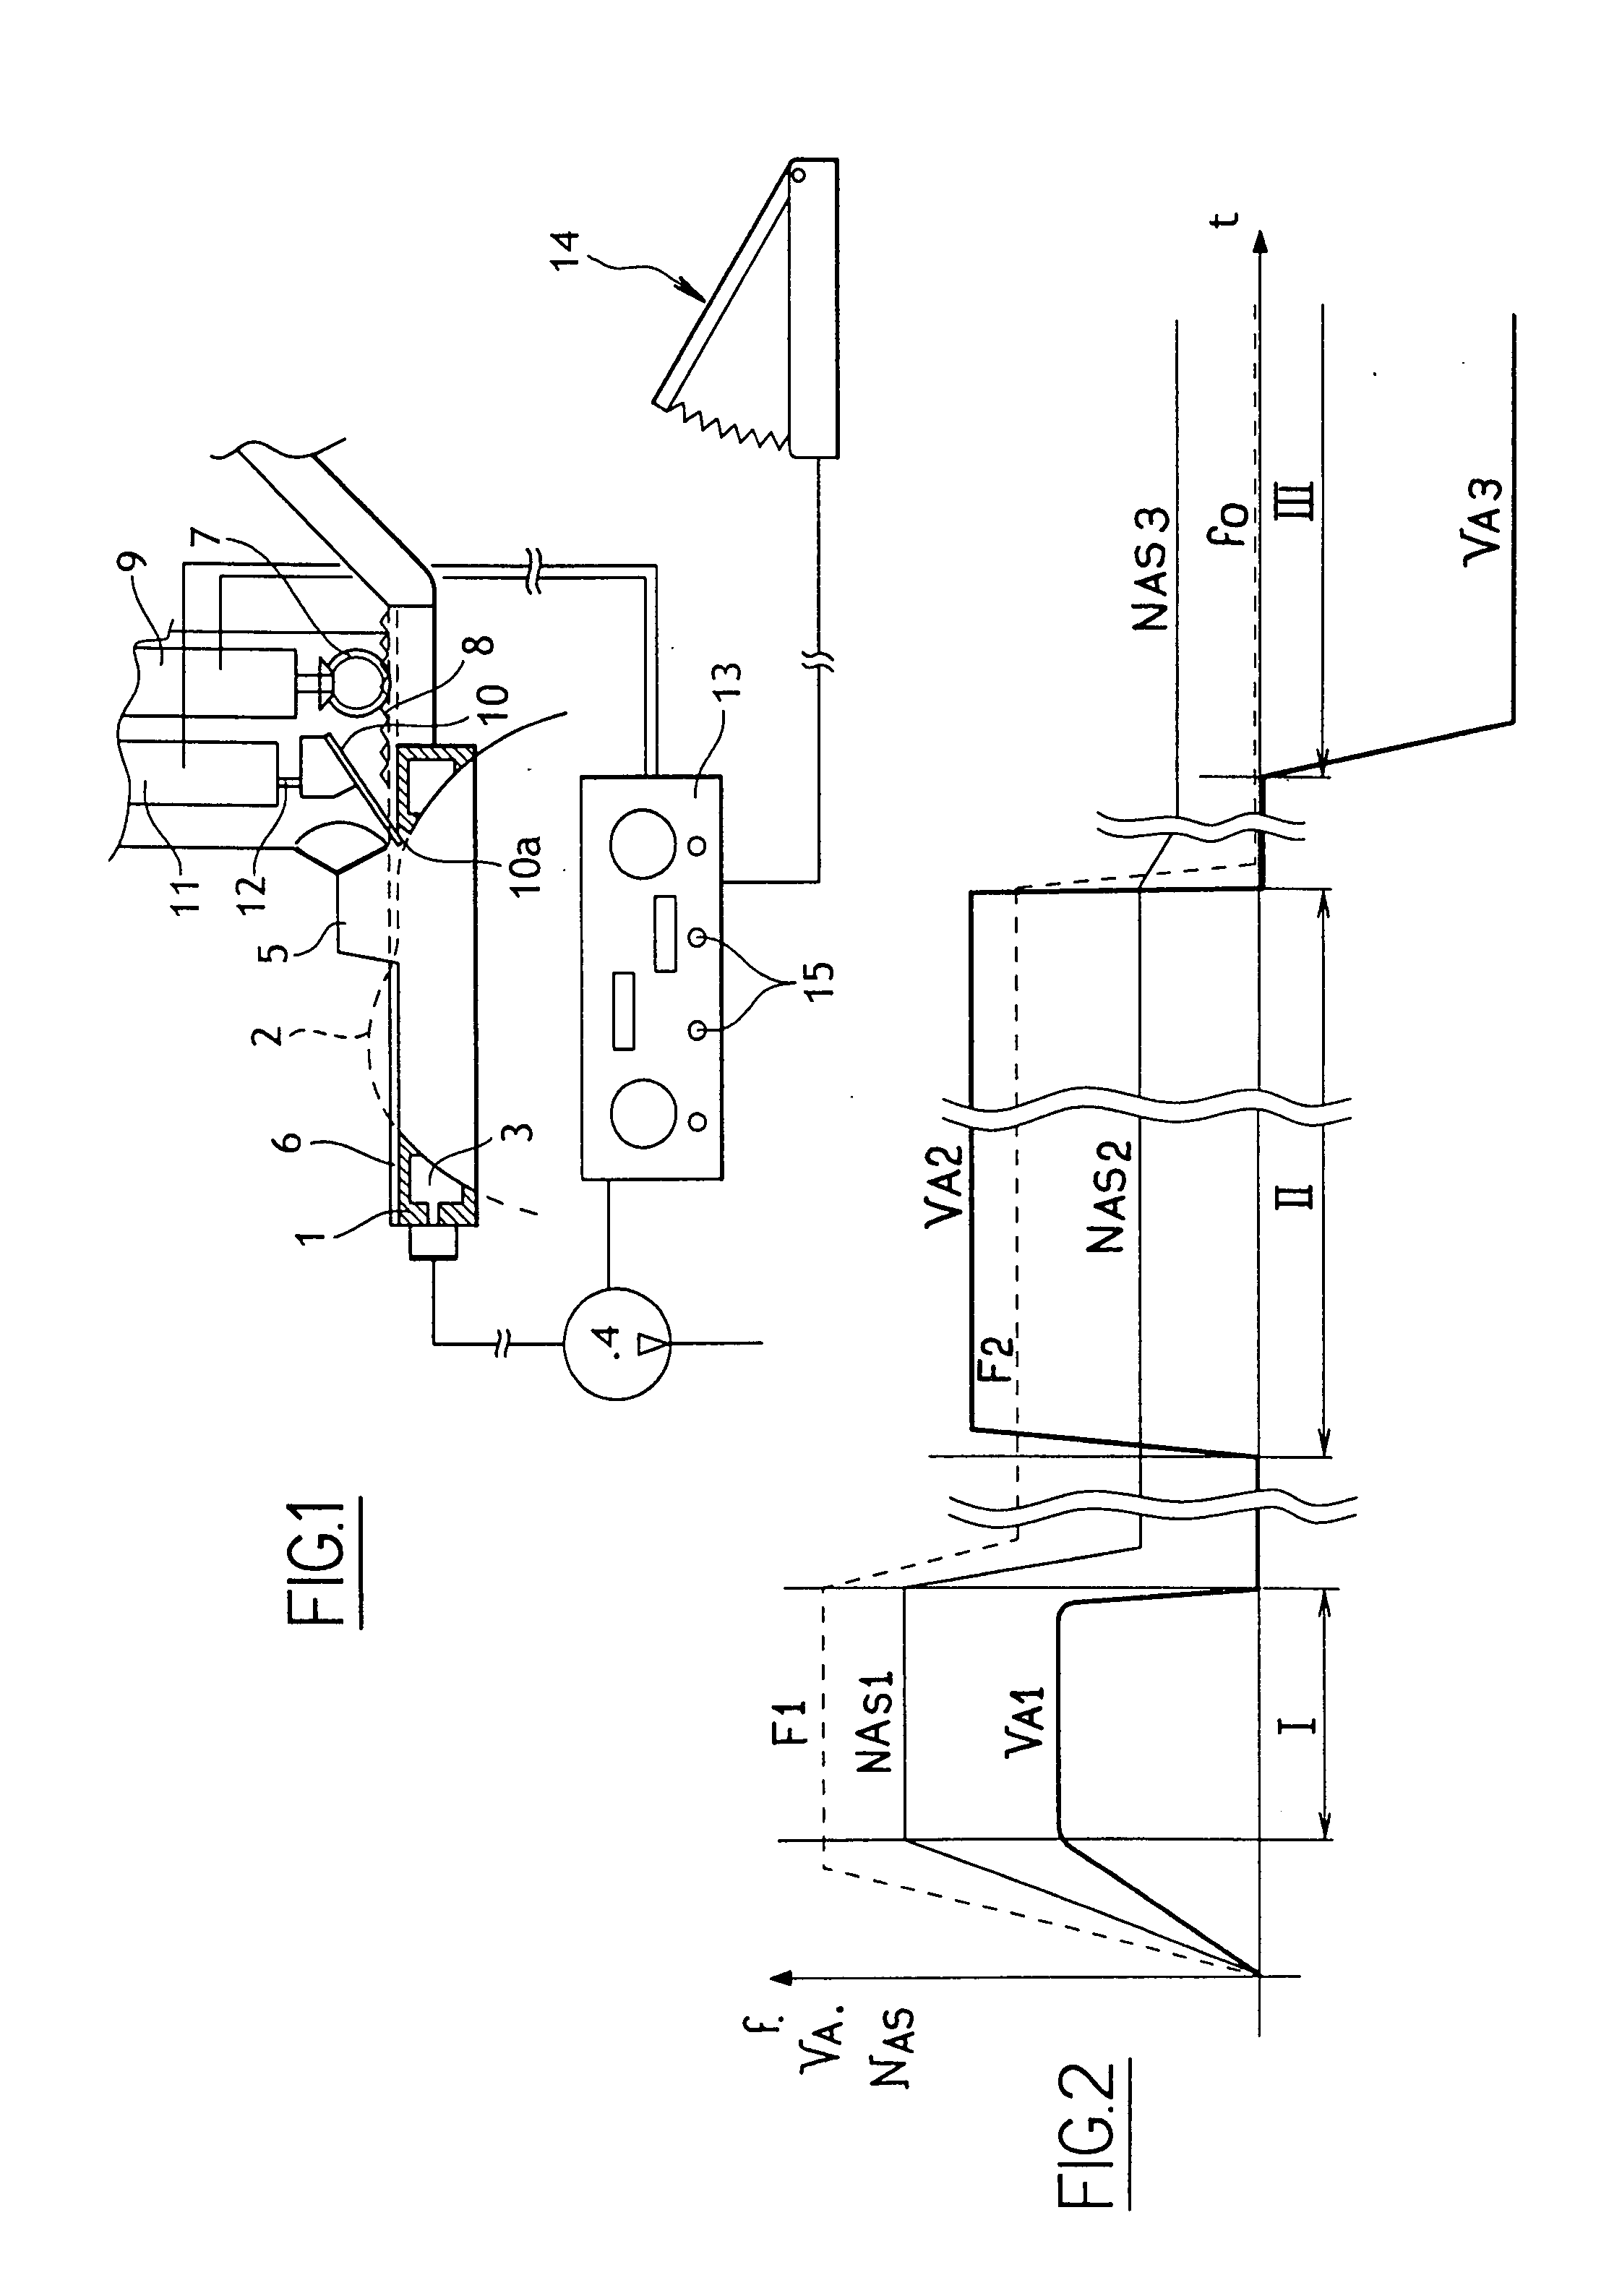 Apparatus for Cutting a Corneal Epithelial Cover